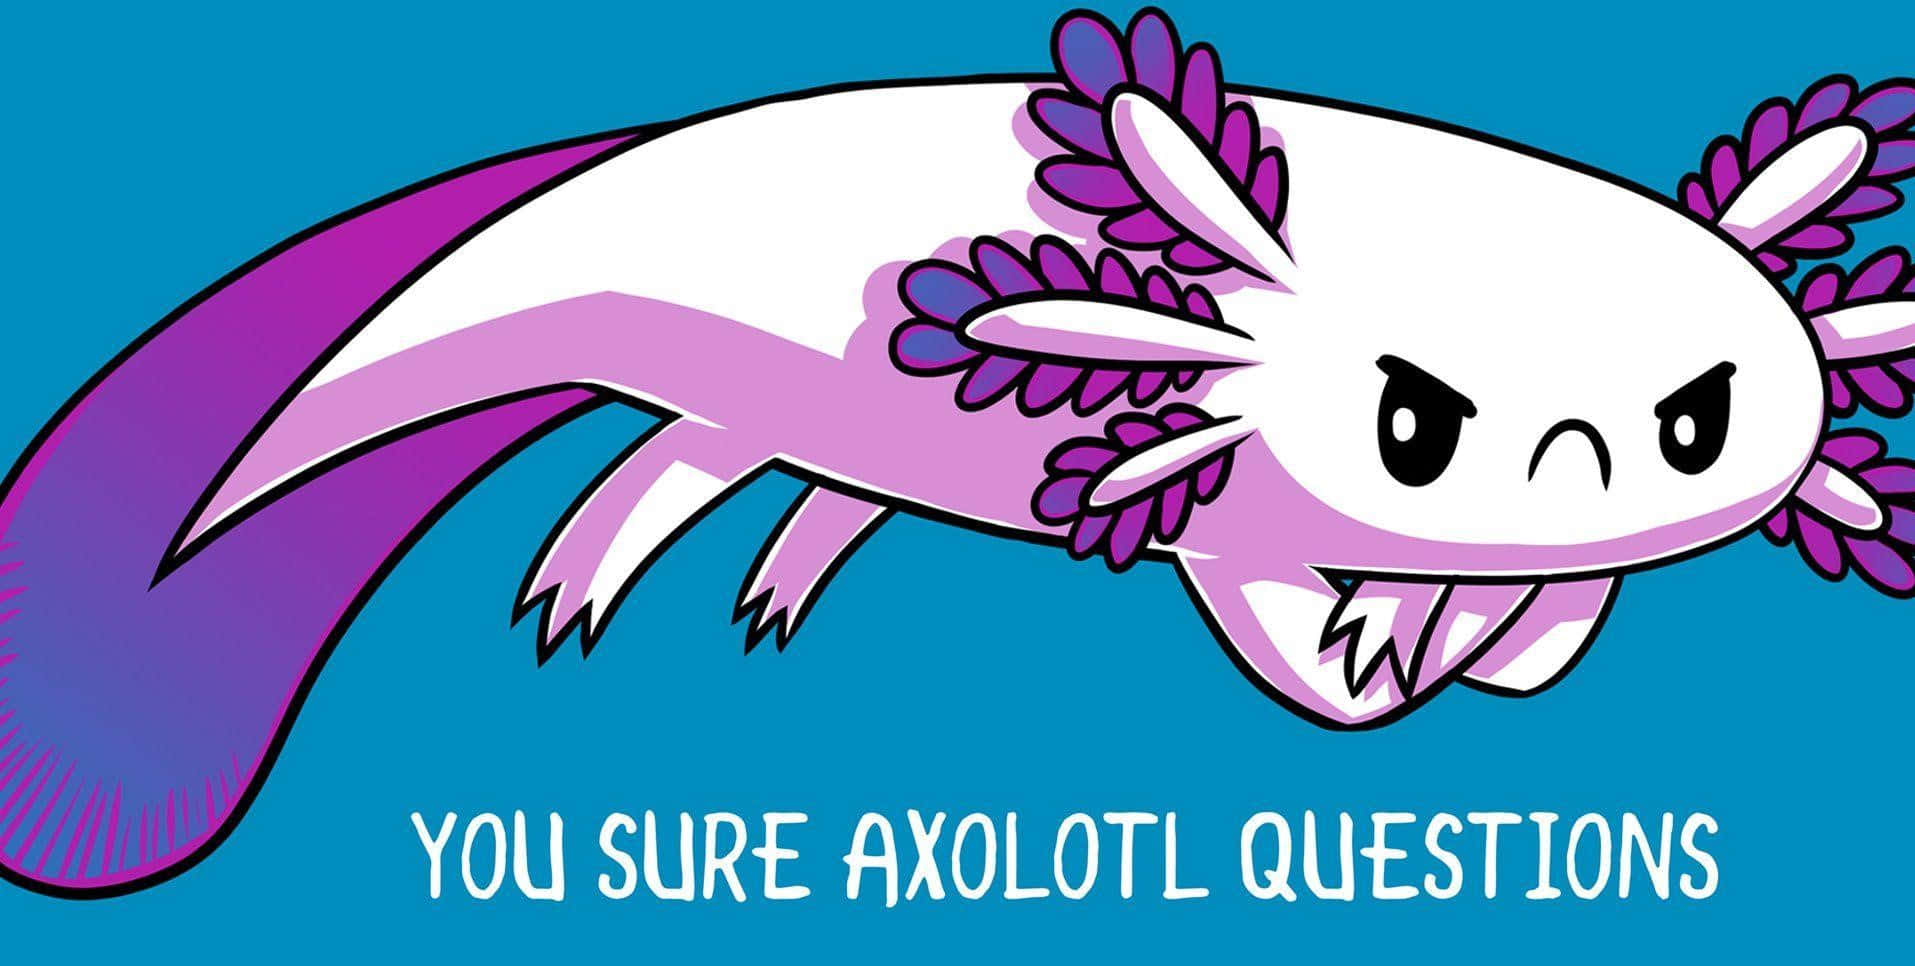 Enjoying the wonders of nature: An adorable axolotl in its pond